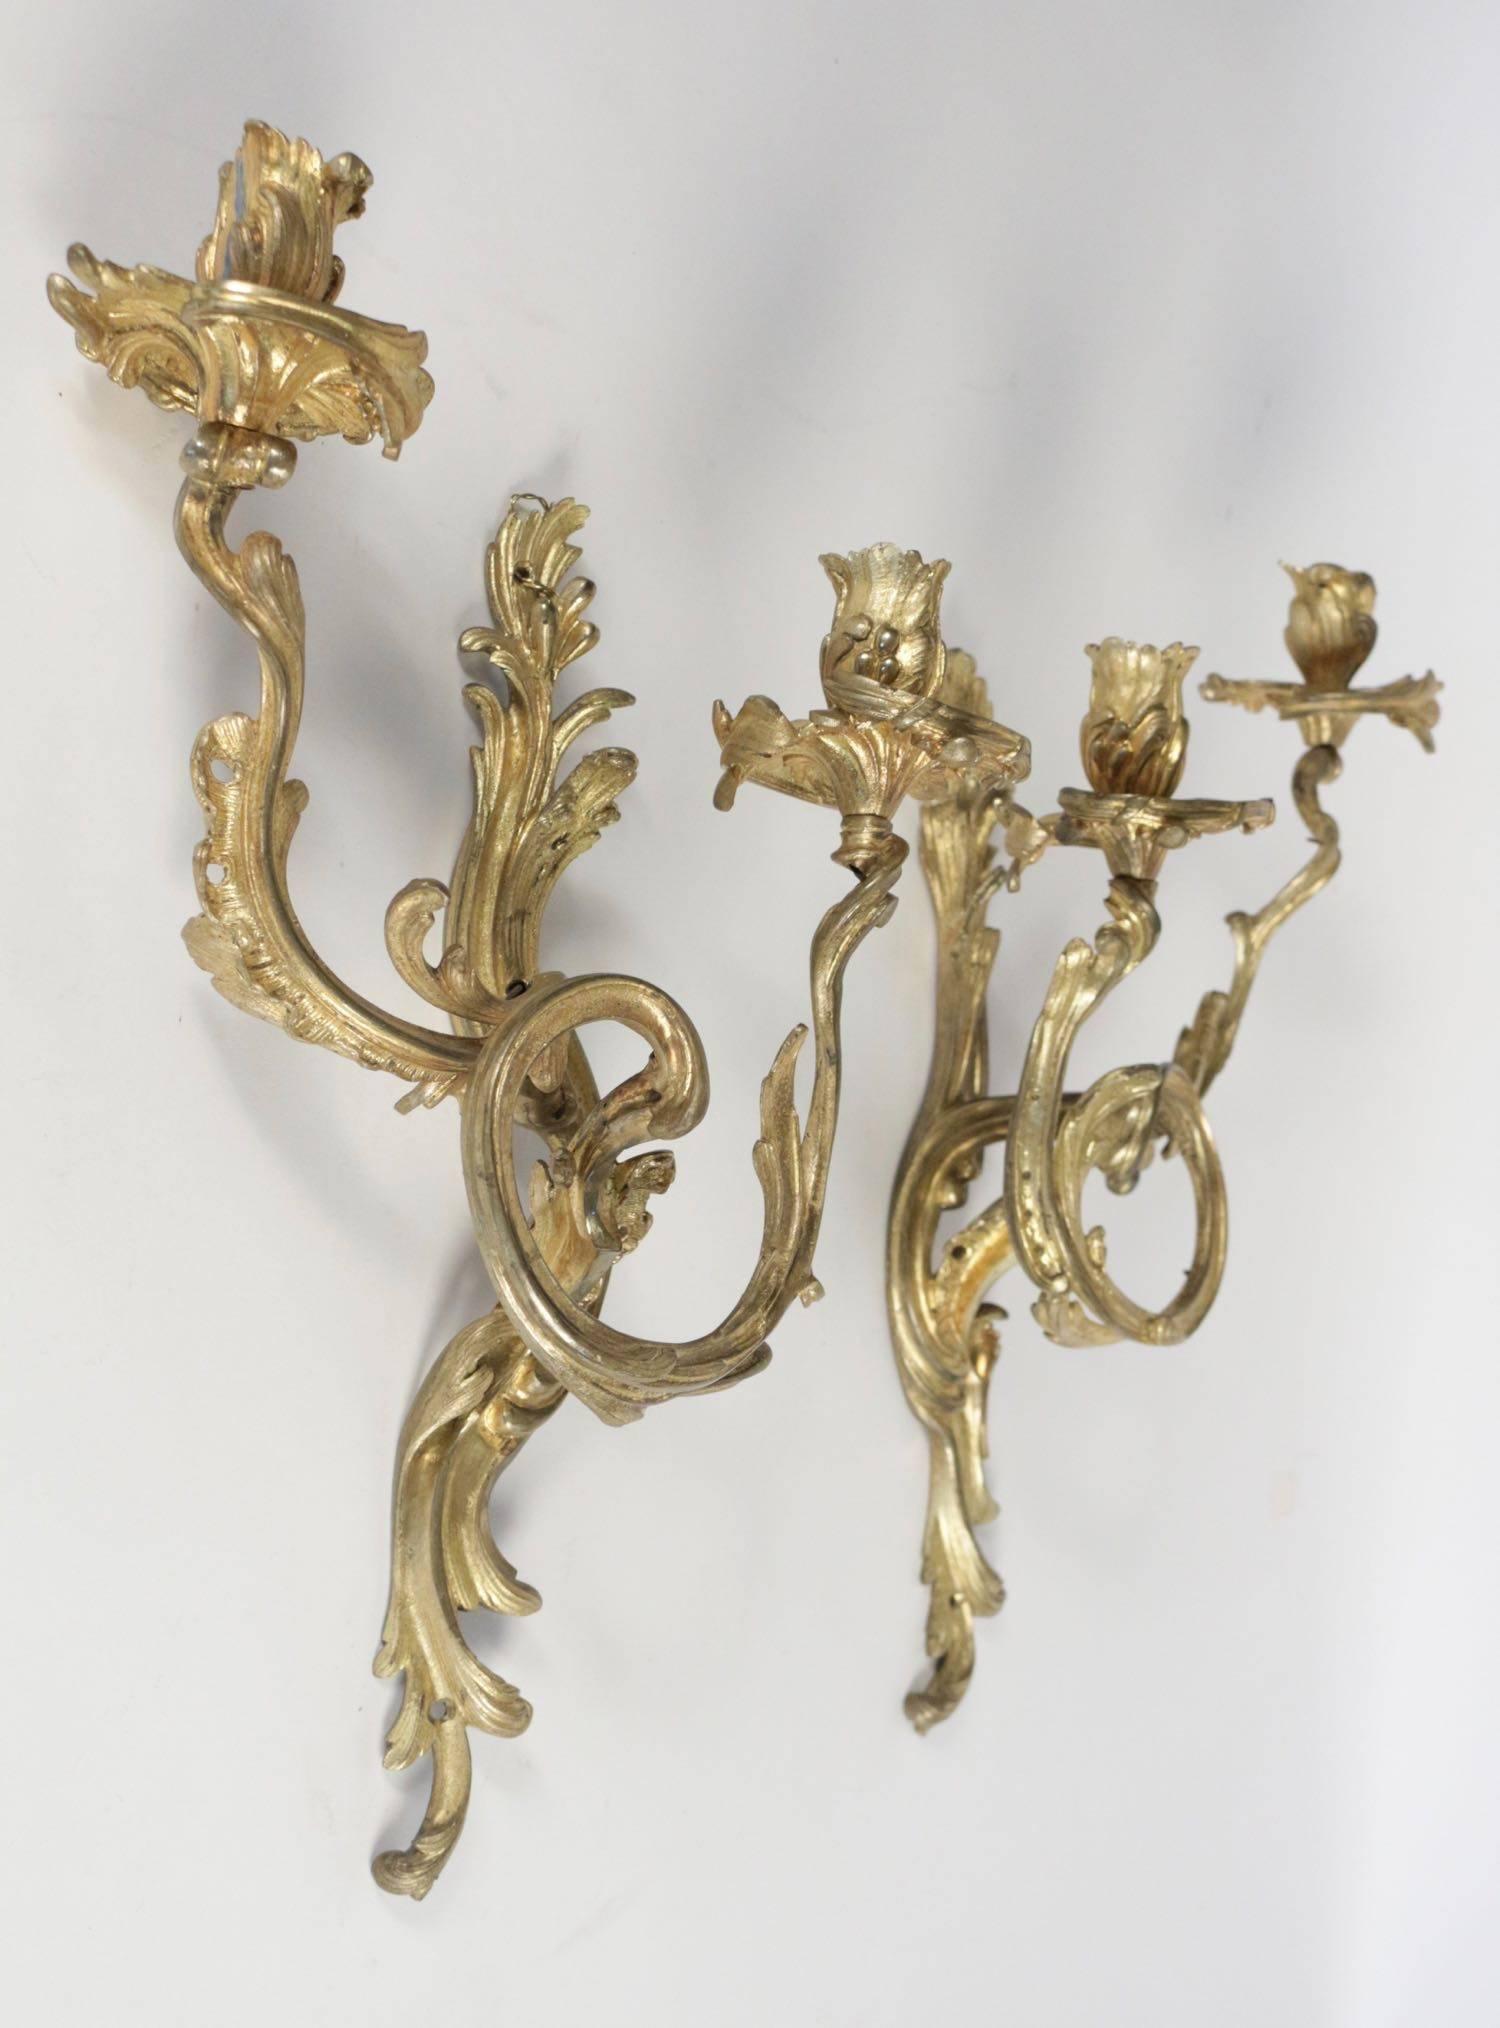 A beautiful ormolu, pair of two lights sconces, finely chiseled, featuring branches and foliage. Original gilding.

Parisian work of the late 19h century.